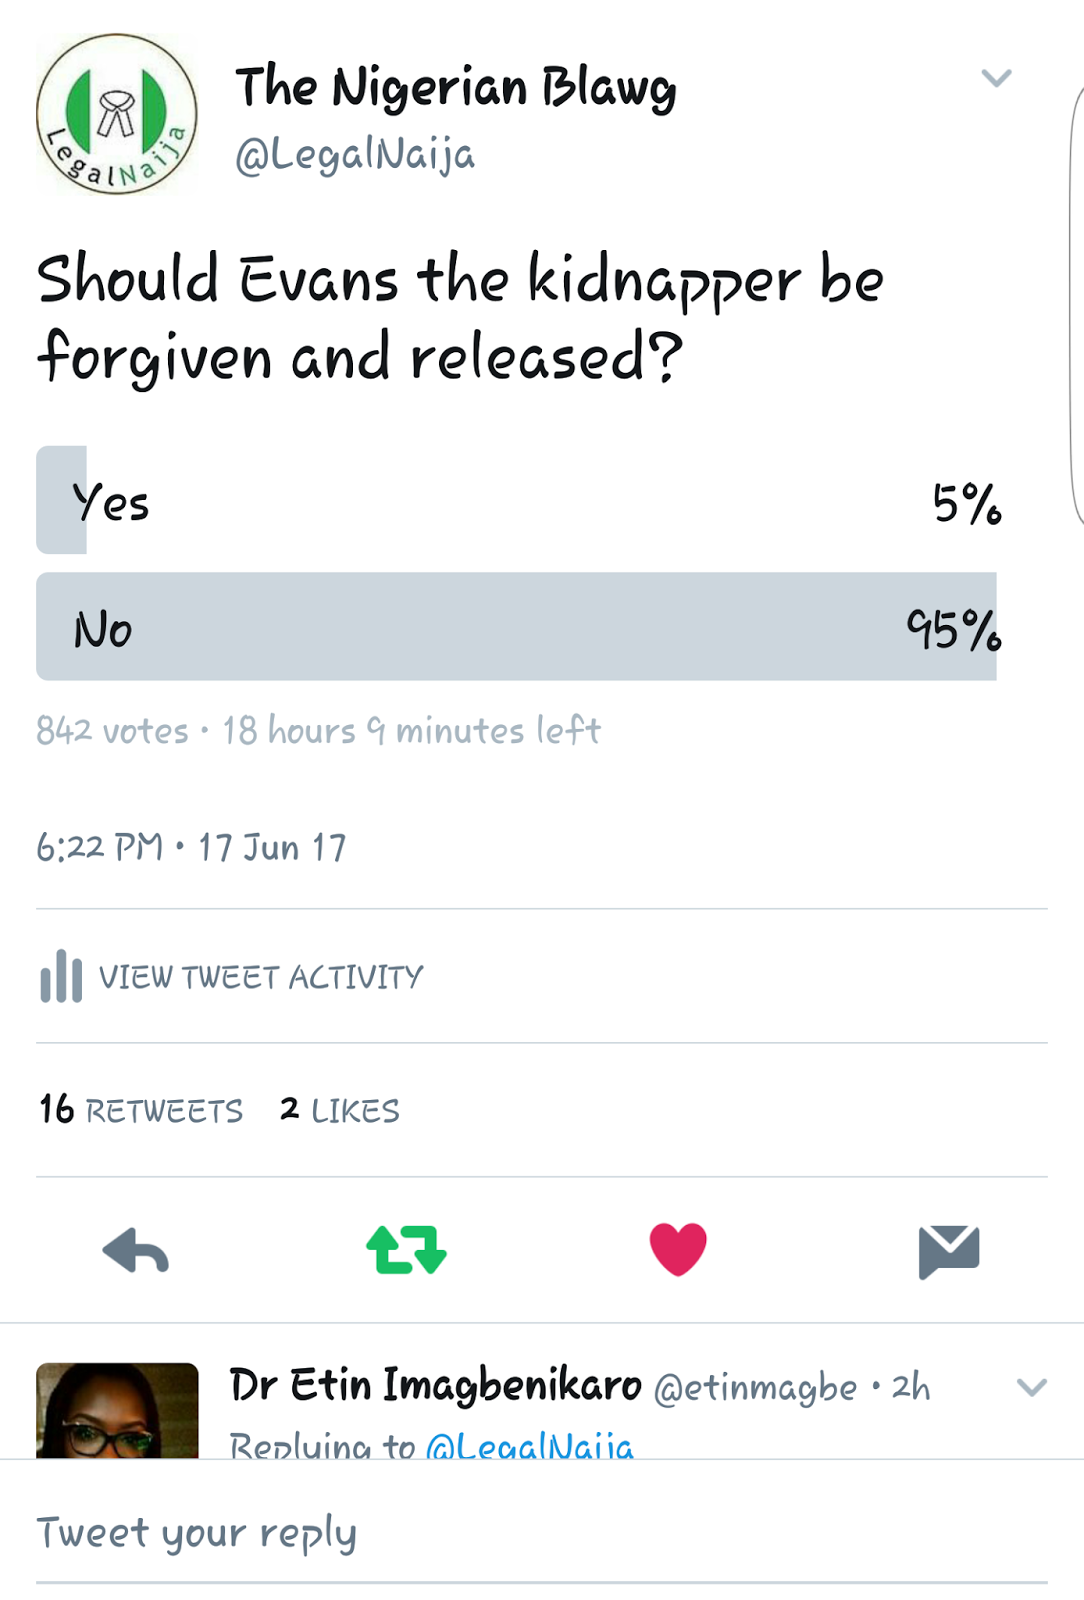 5 takeaways from our poll on whether Evans the kidnapper should be released on compassionate grounds